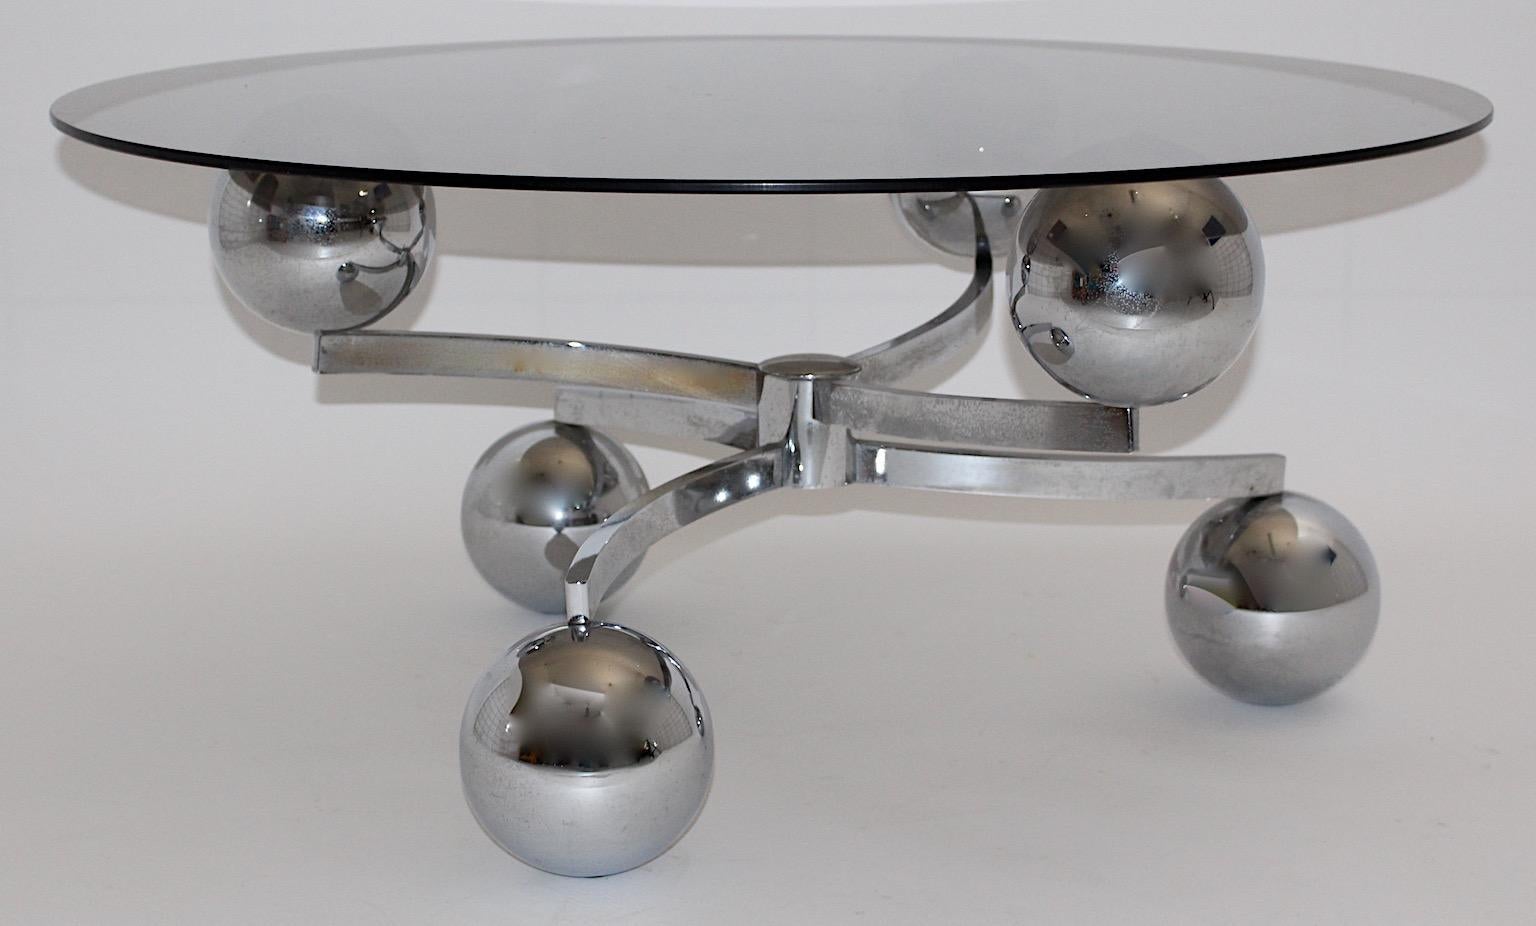 Space Age vintage sofa table or coffee table from chromed metal sputnik like with glass plate circa 1970.
A sofa table with a chromed metal base which shows fantastic movement and drive.
While the base features balls like planets in orbit and